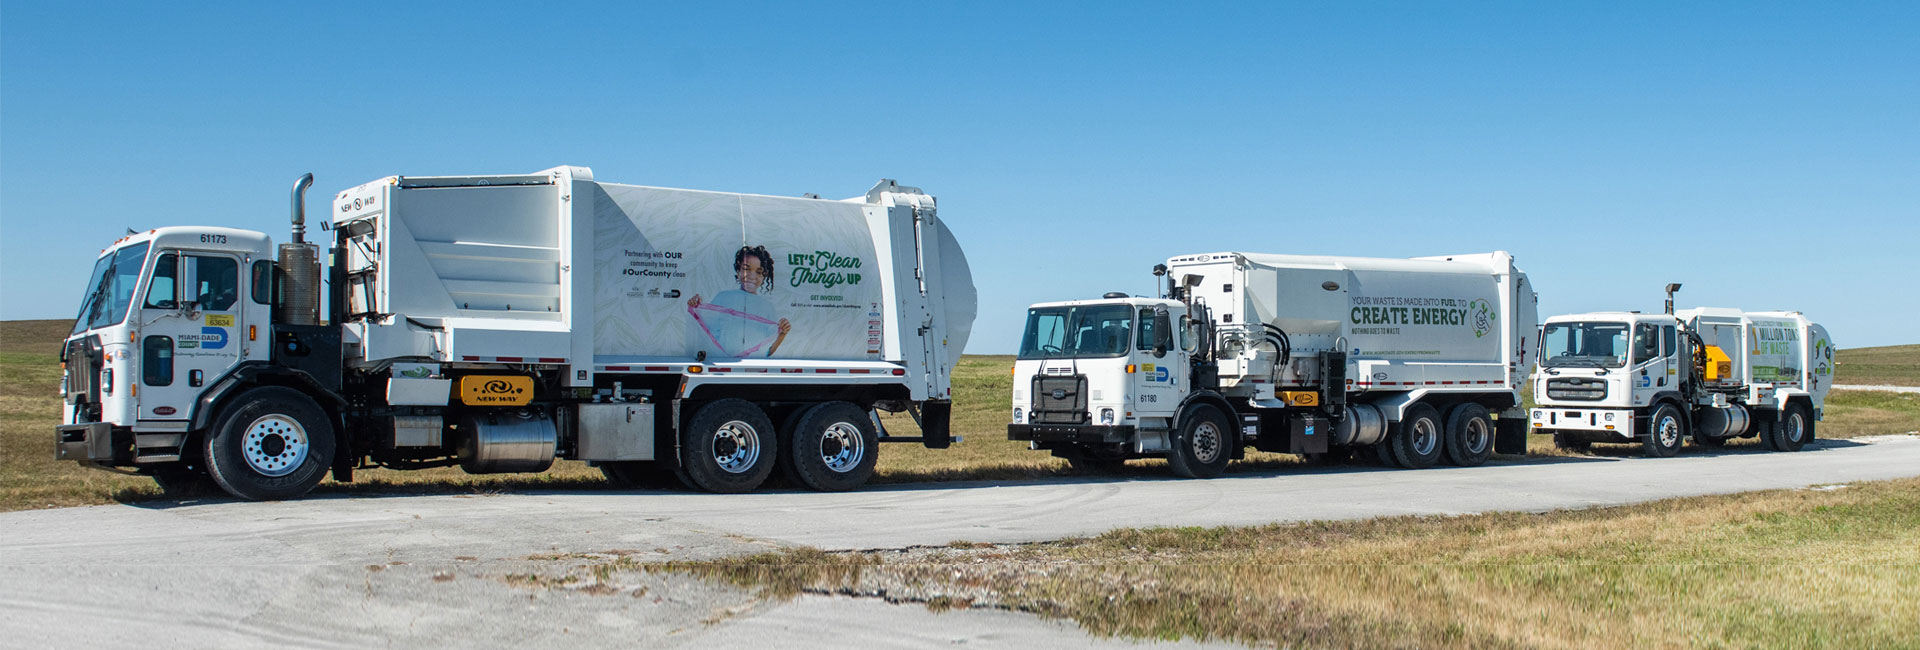 Miami-Dade County Solid Waste